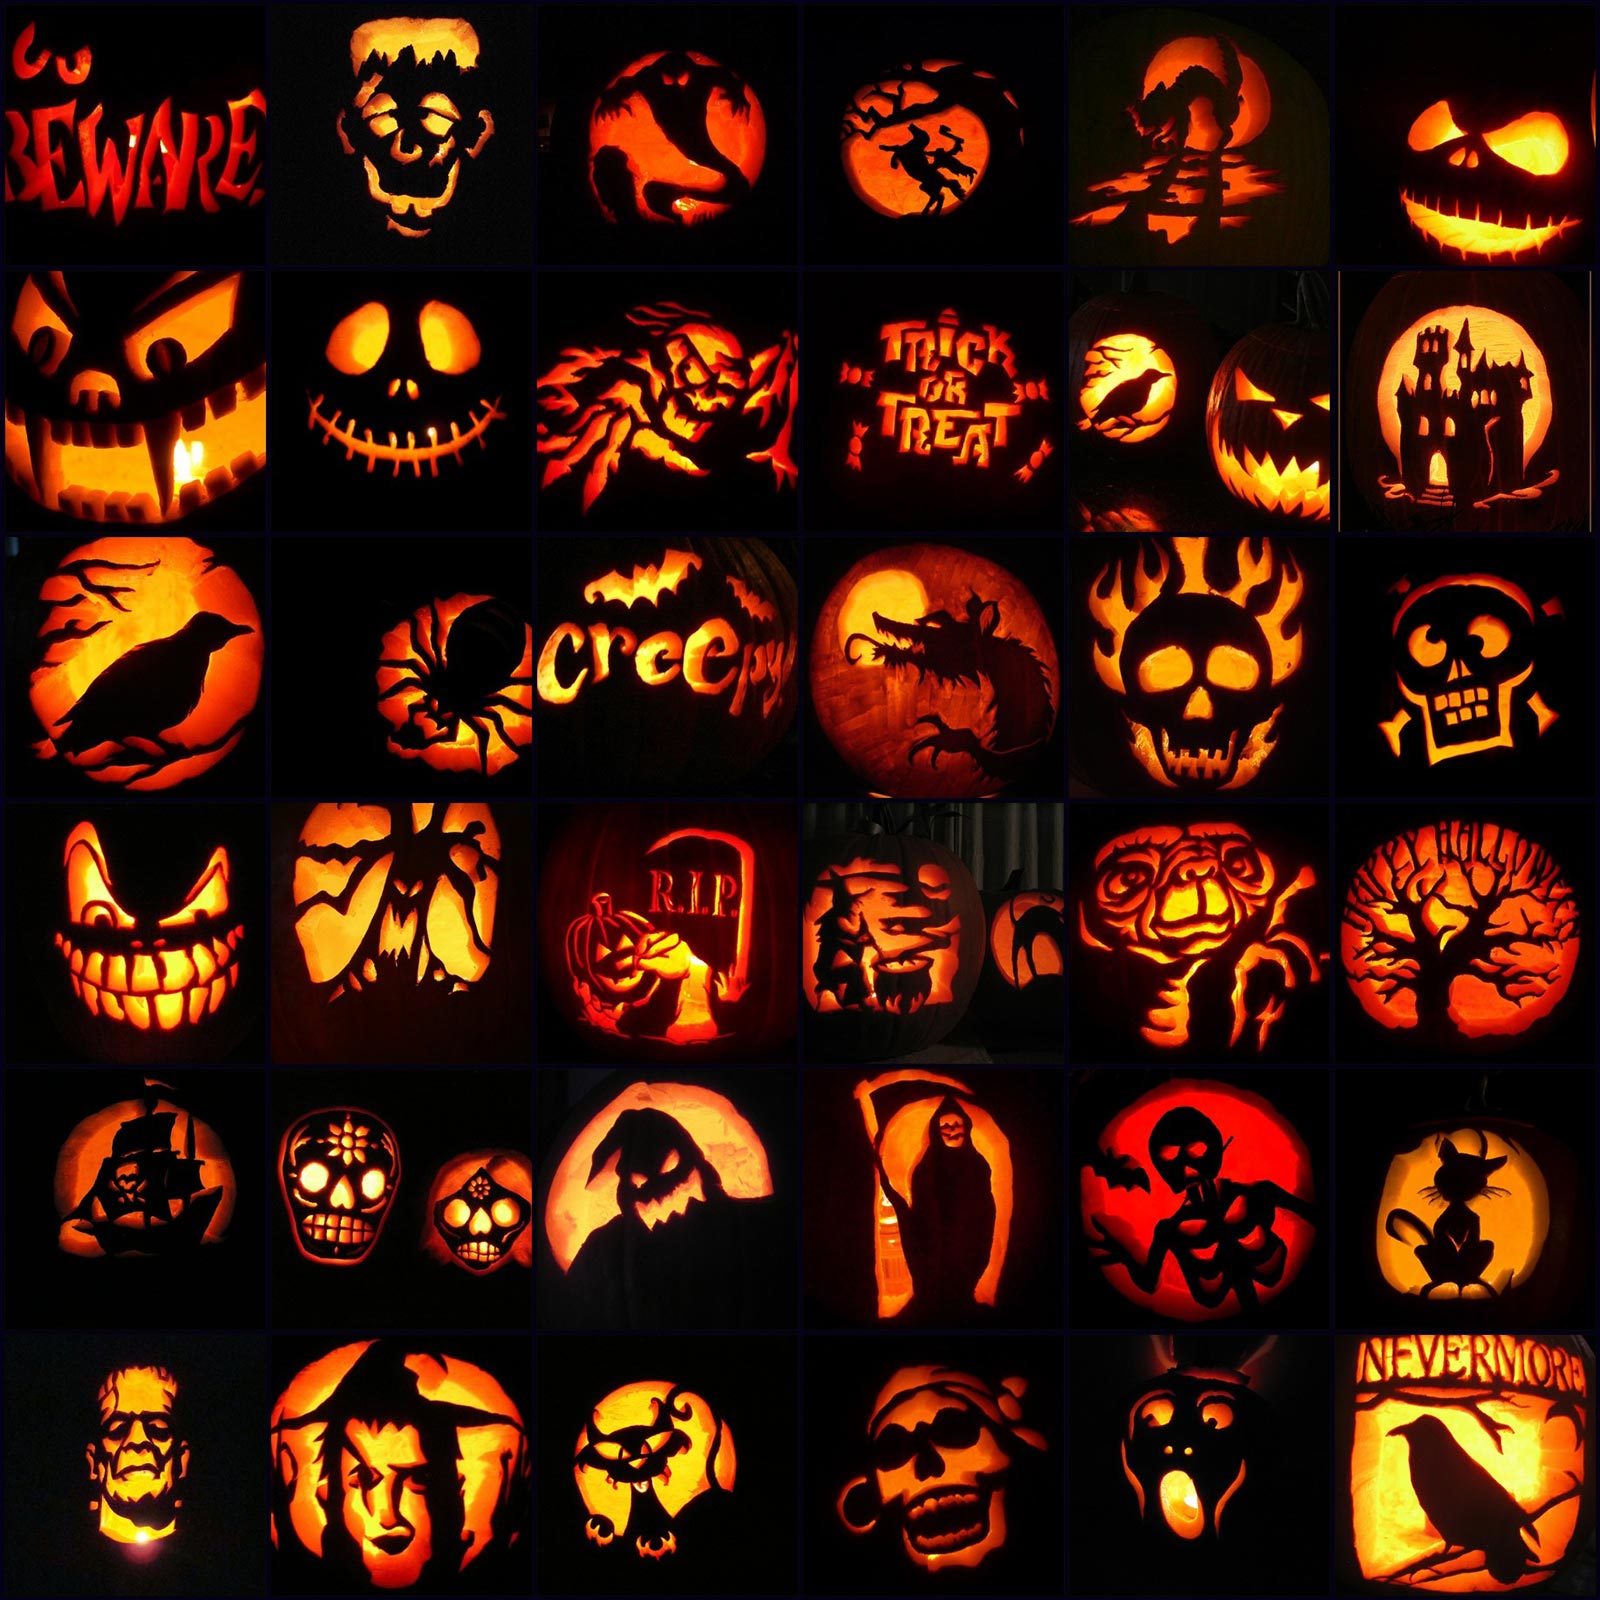 600-scary-halloween-pumpkin-carving-face-ideas-designs-2018-for-kids-adults